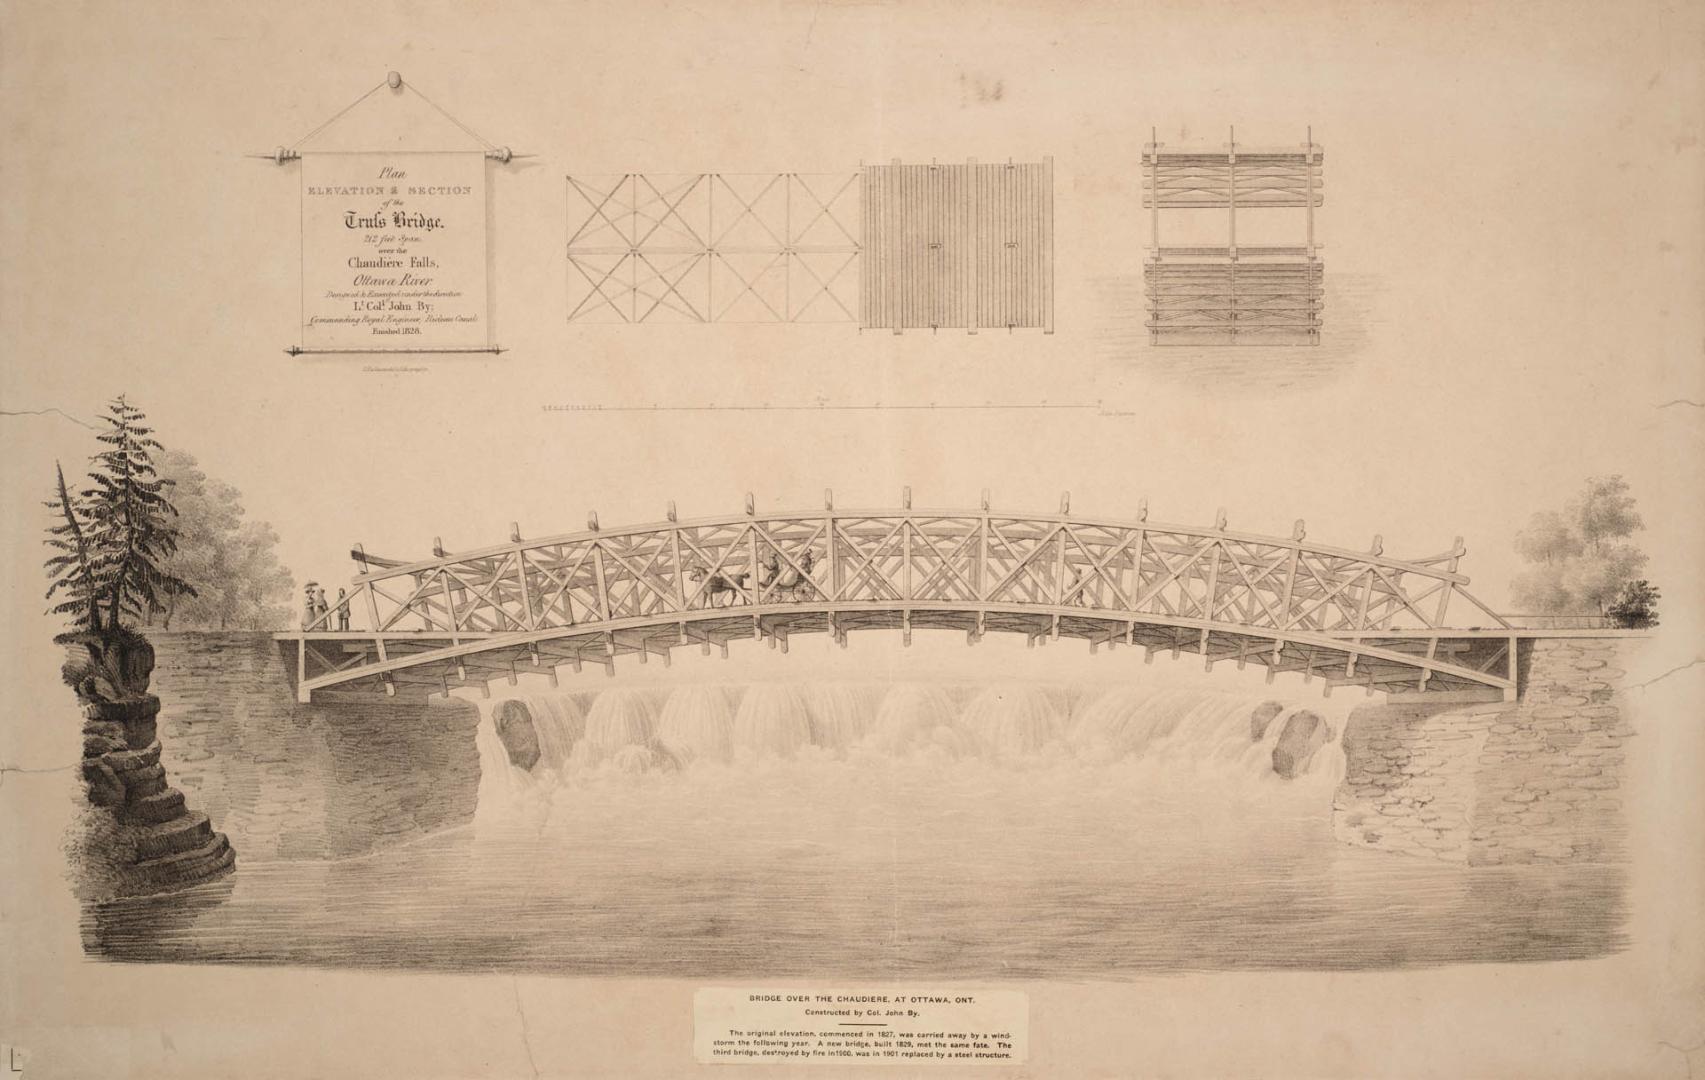 Plan, Elevation and Section of the Truss Bridge over the Chaudiere Falls, Ottawa River (Ottawa, Ontario)